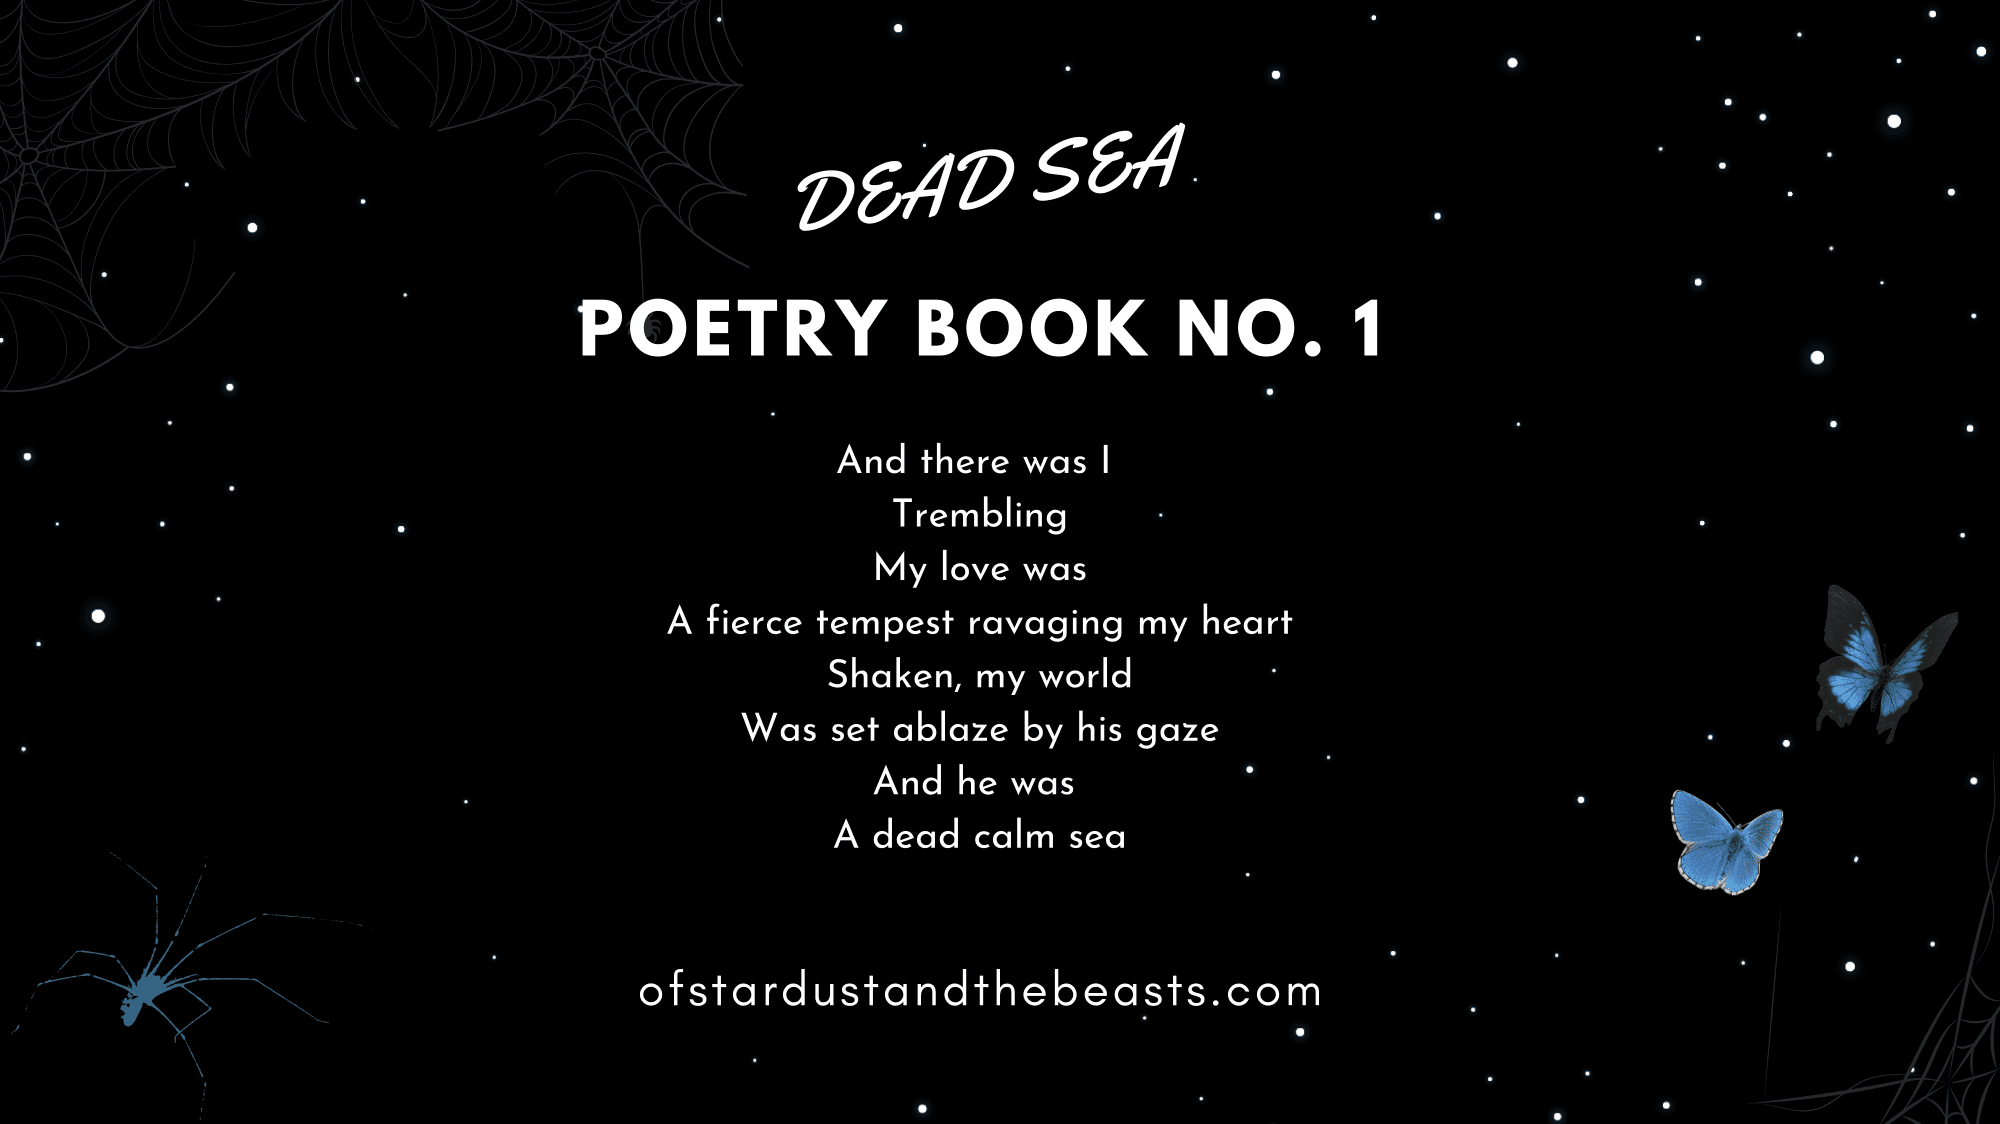 Poem from the poetry book... Dead calm Sea.